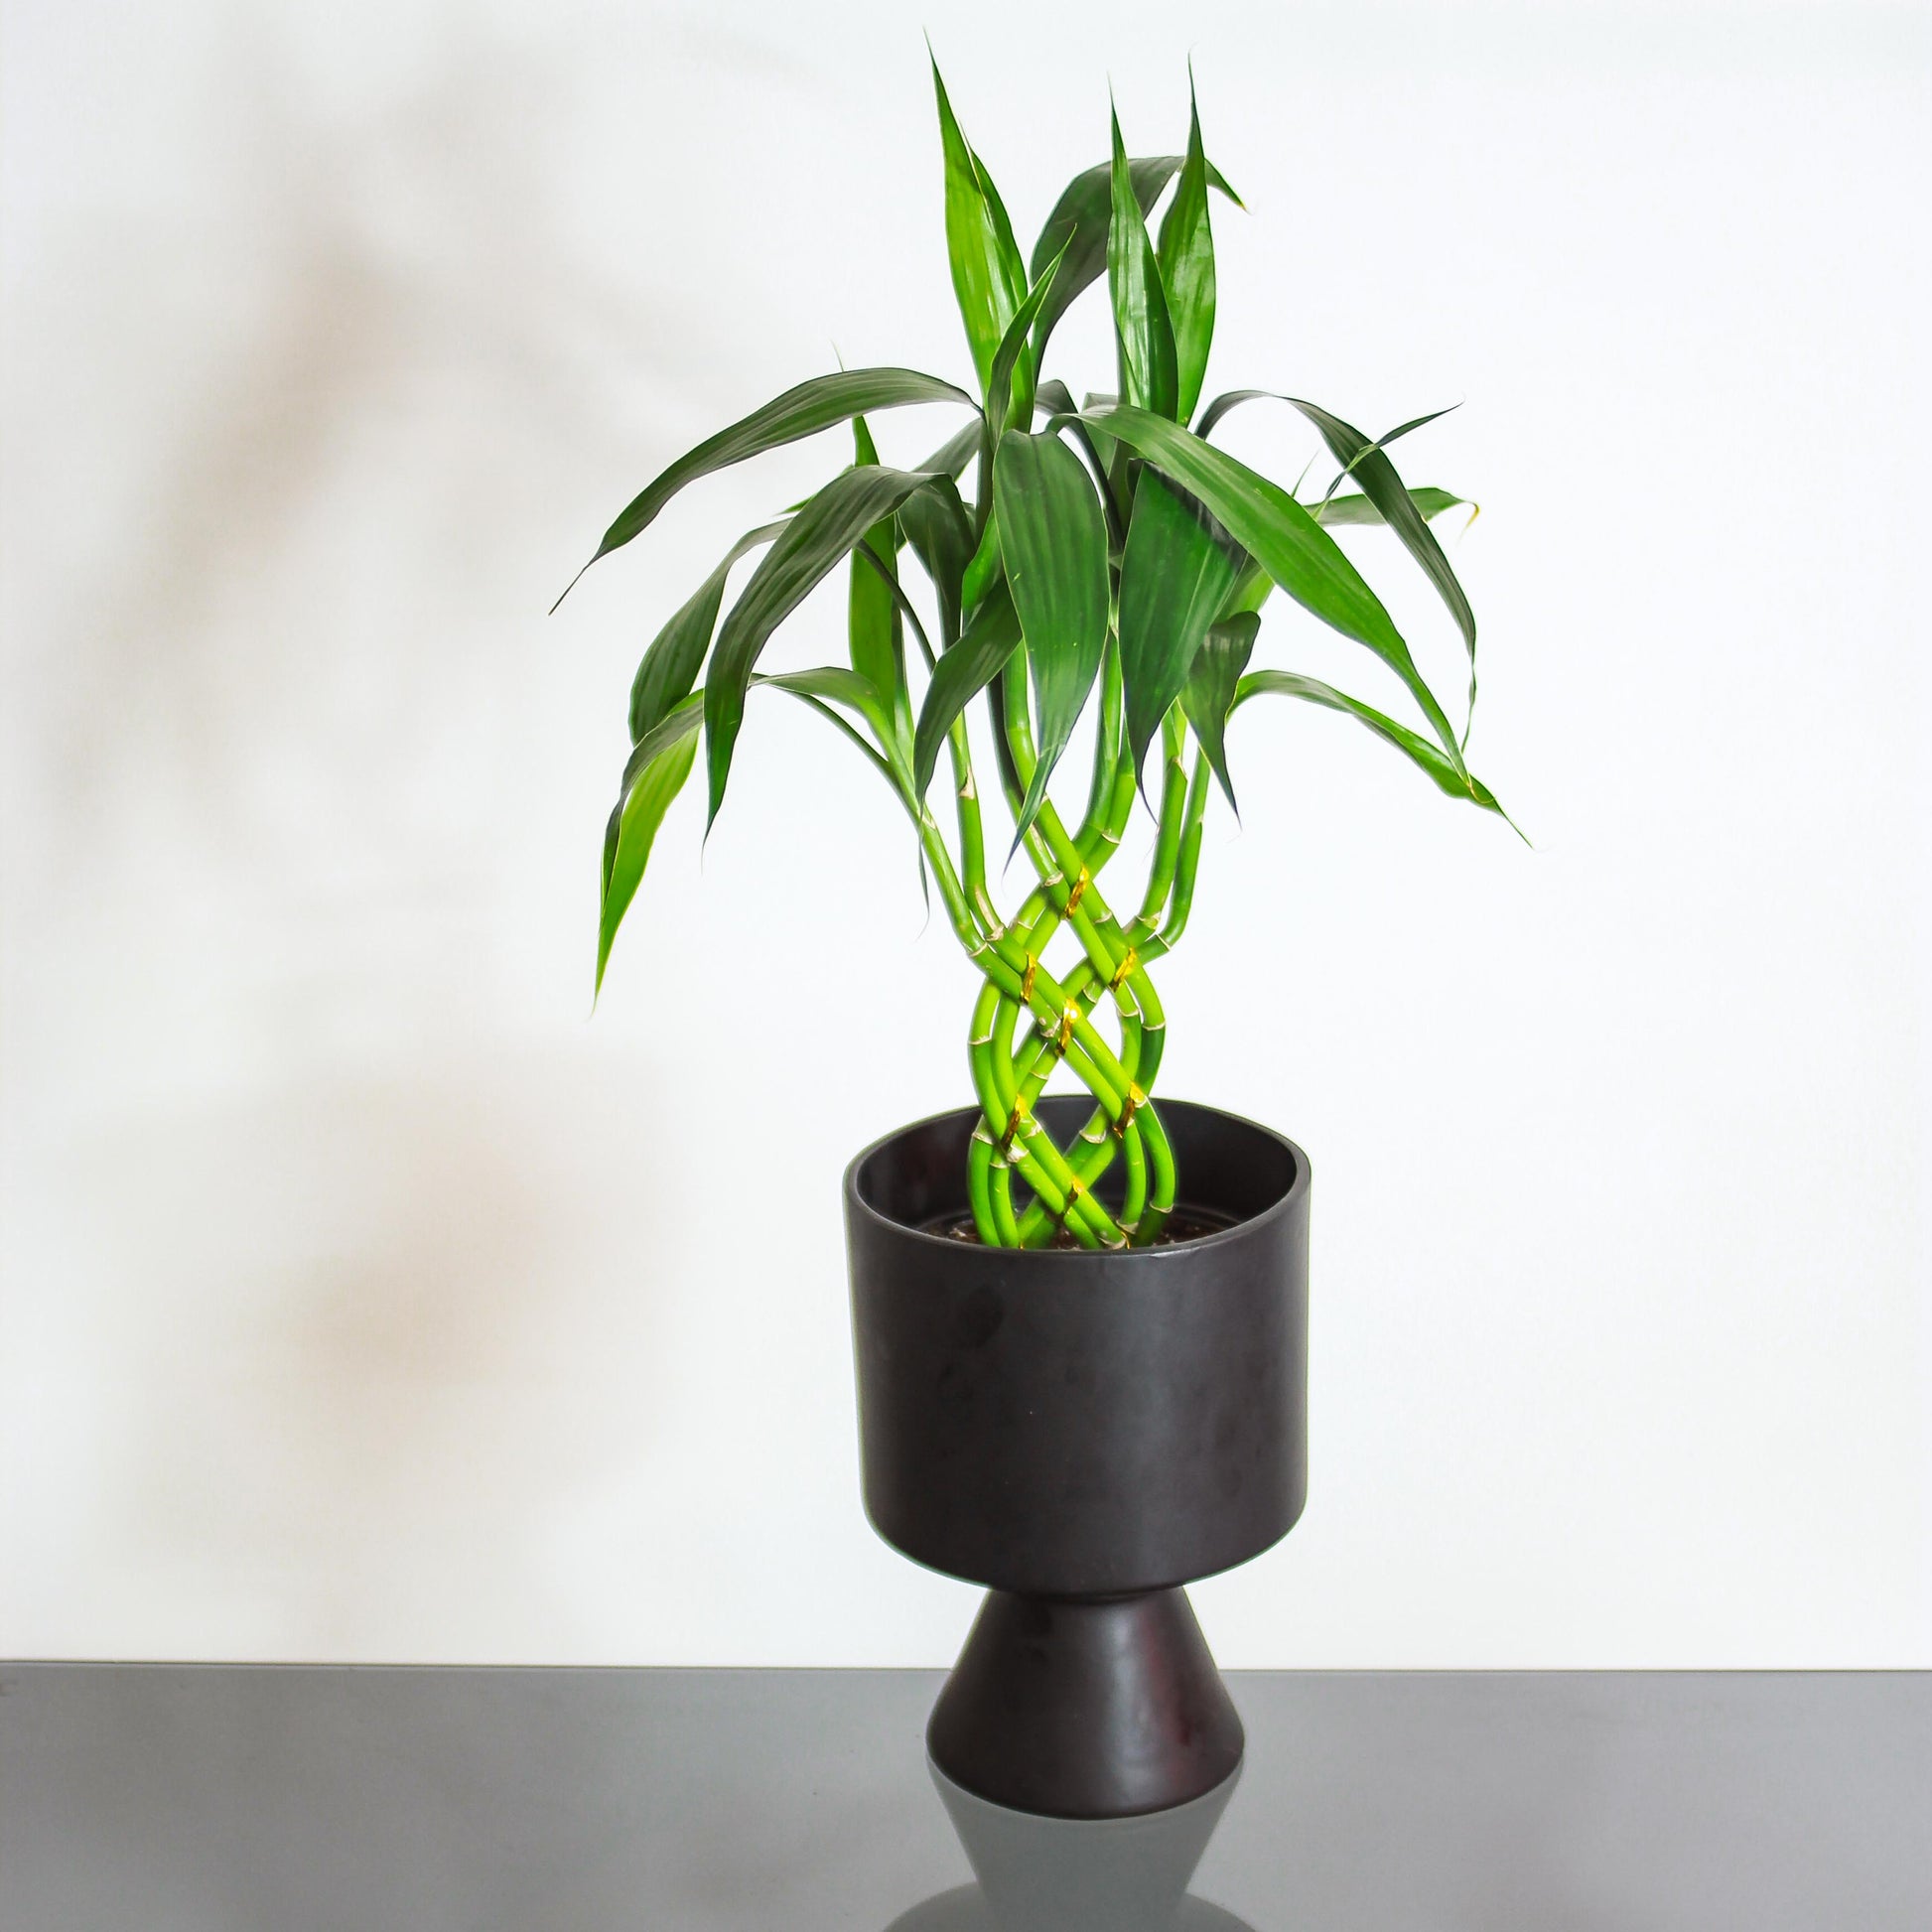 Lucky Bamboo 8 Stem (Dracaena braunii) in a 8 inch pot. Indoor plant for sale by Promise Supply for delivery and pickup in Toronto